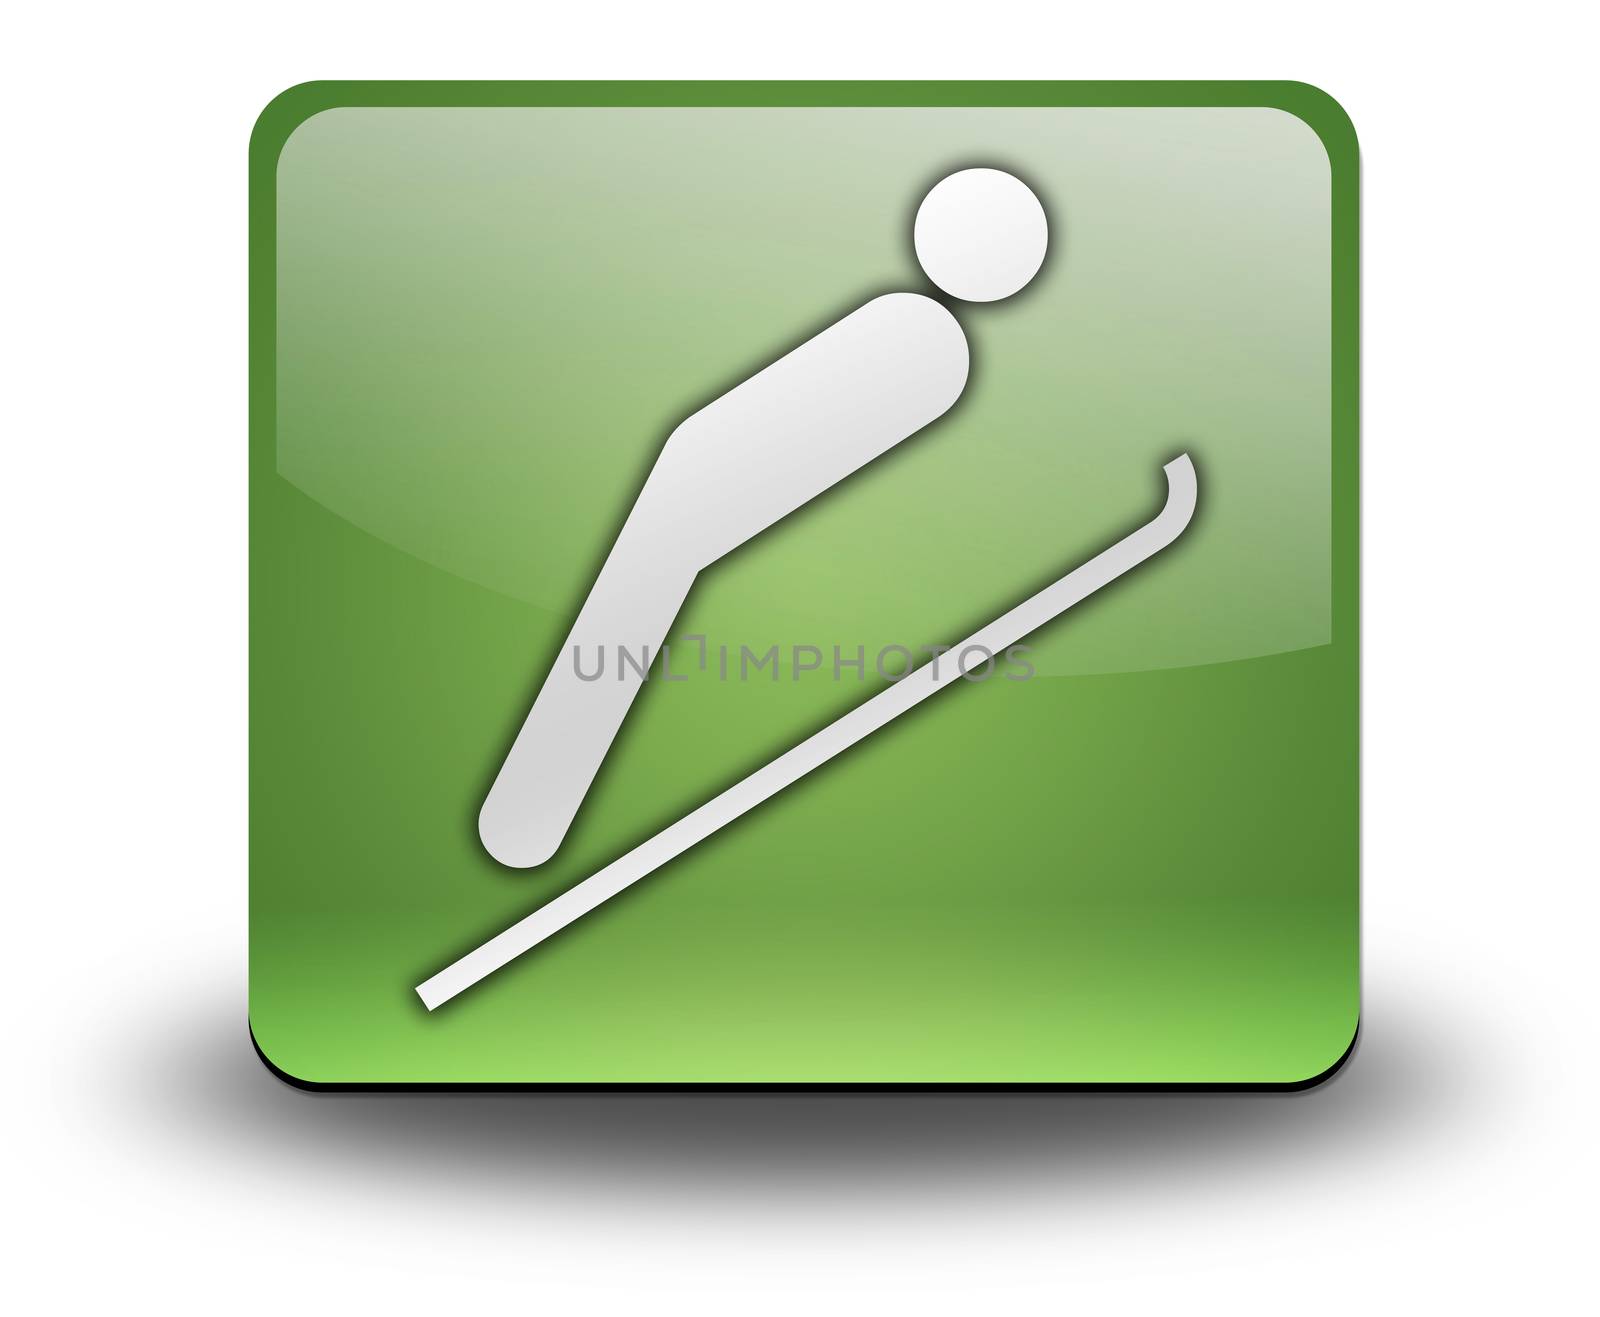 Icon, Button, Pictogram Ski Jumping by mindscanner